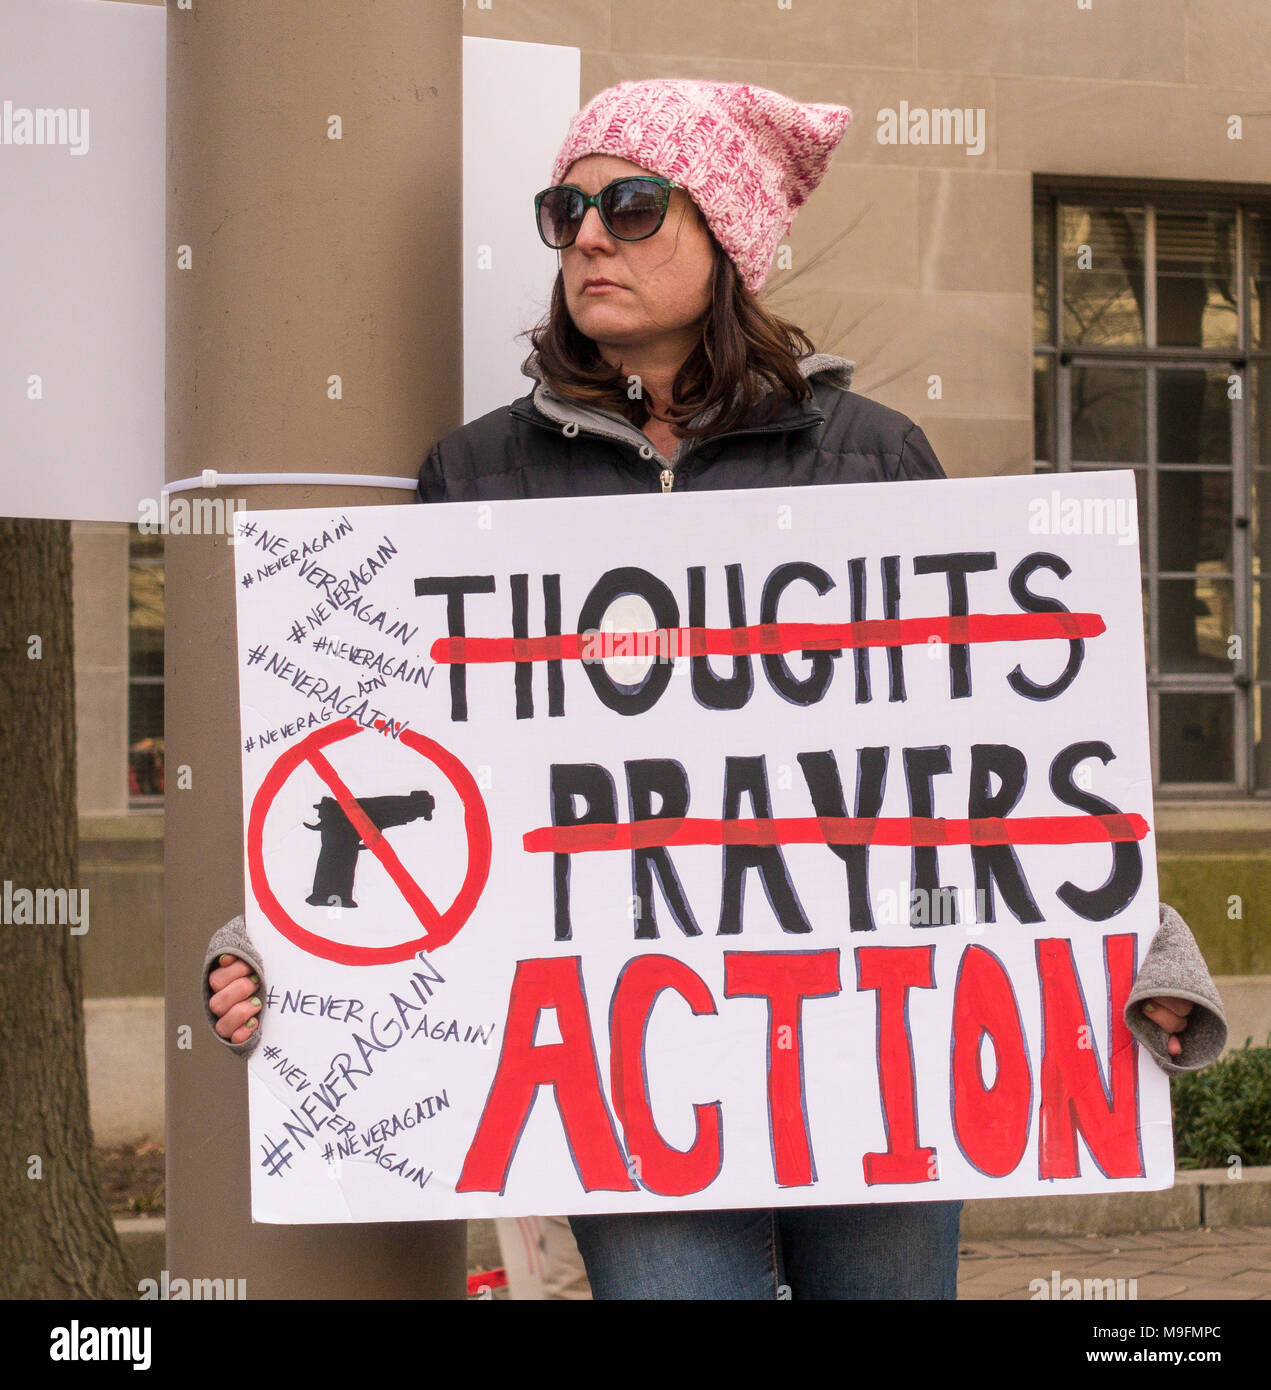 WASHINGTON, DC, USA - March for Our Lives demonstration, protesting gun violence. Stock Photo